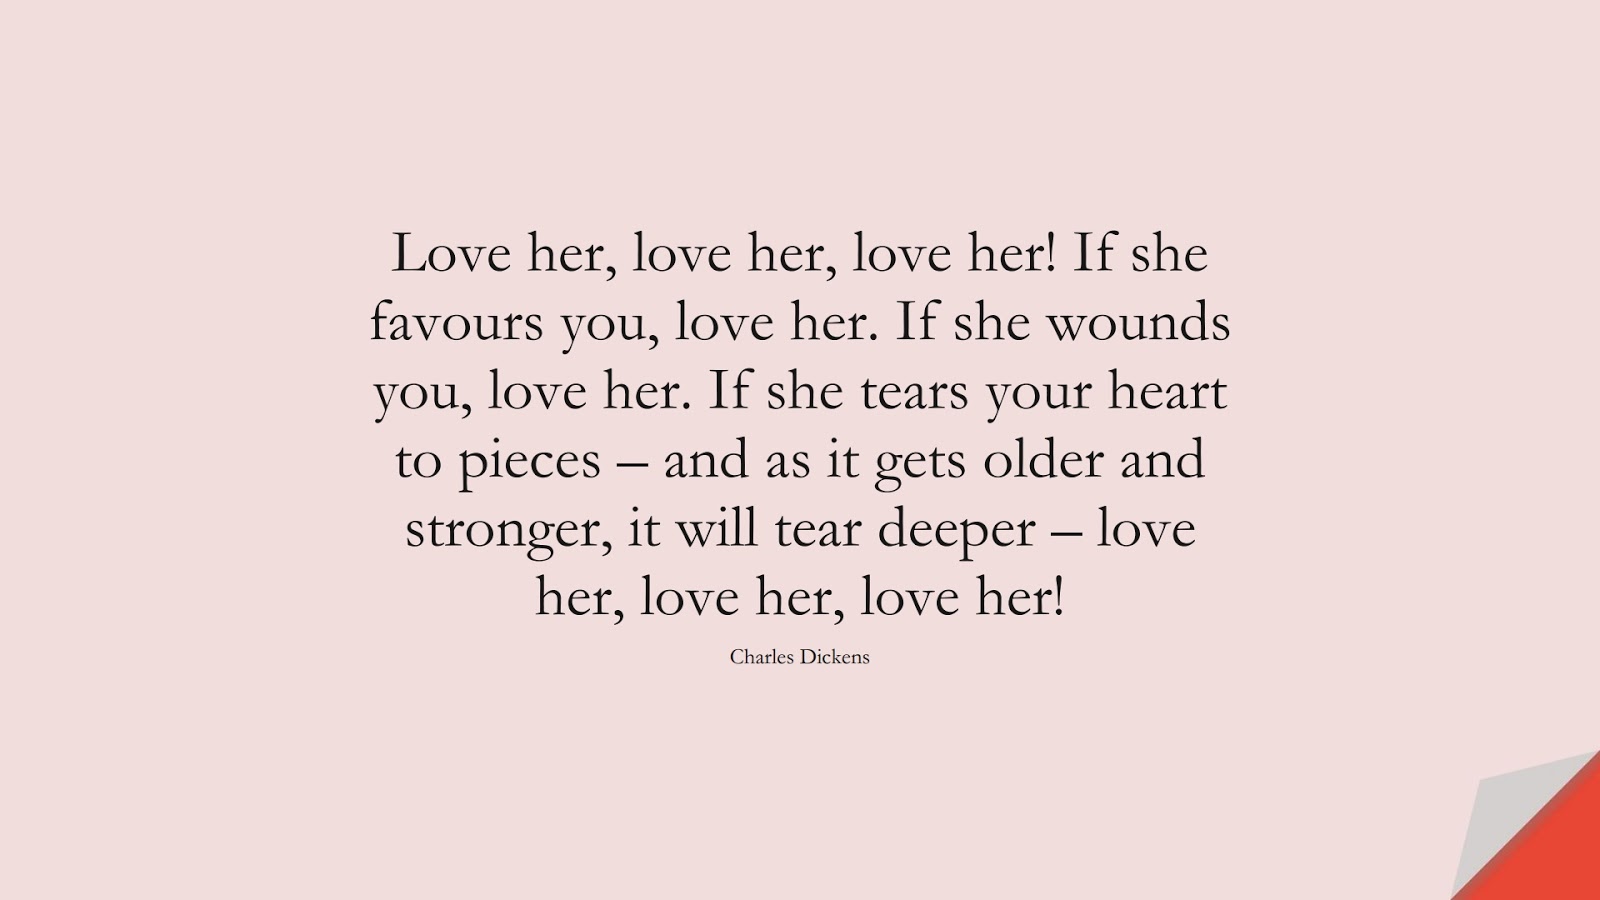 Love her, love her, love her! If she favours you, love her. If she wounds you, love her. If she tears your heart to pieces – and as it gets older and stronger, it will tear deeper – love her, love her, love her! (Charles Dickens);  #LoveQuotes